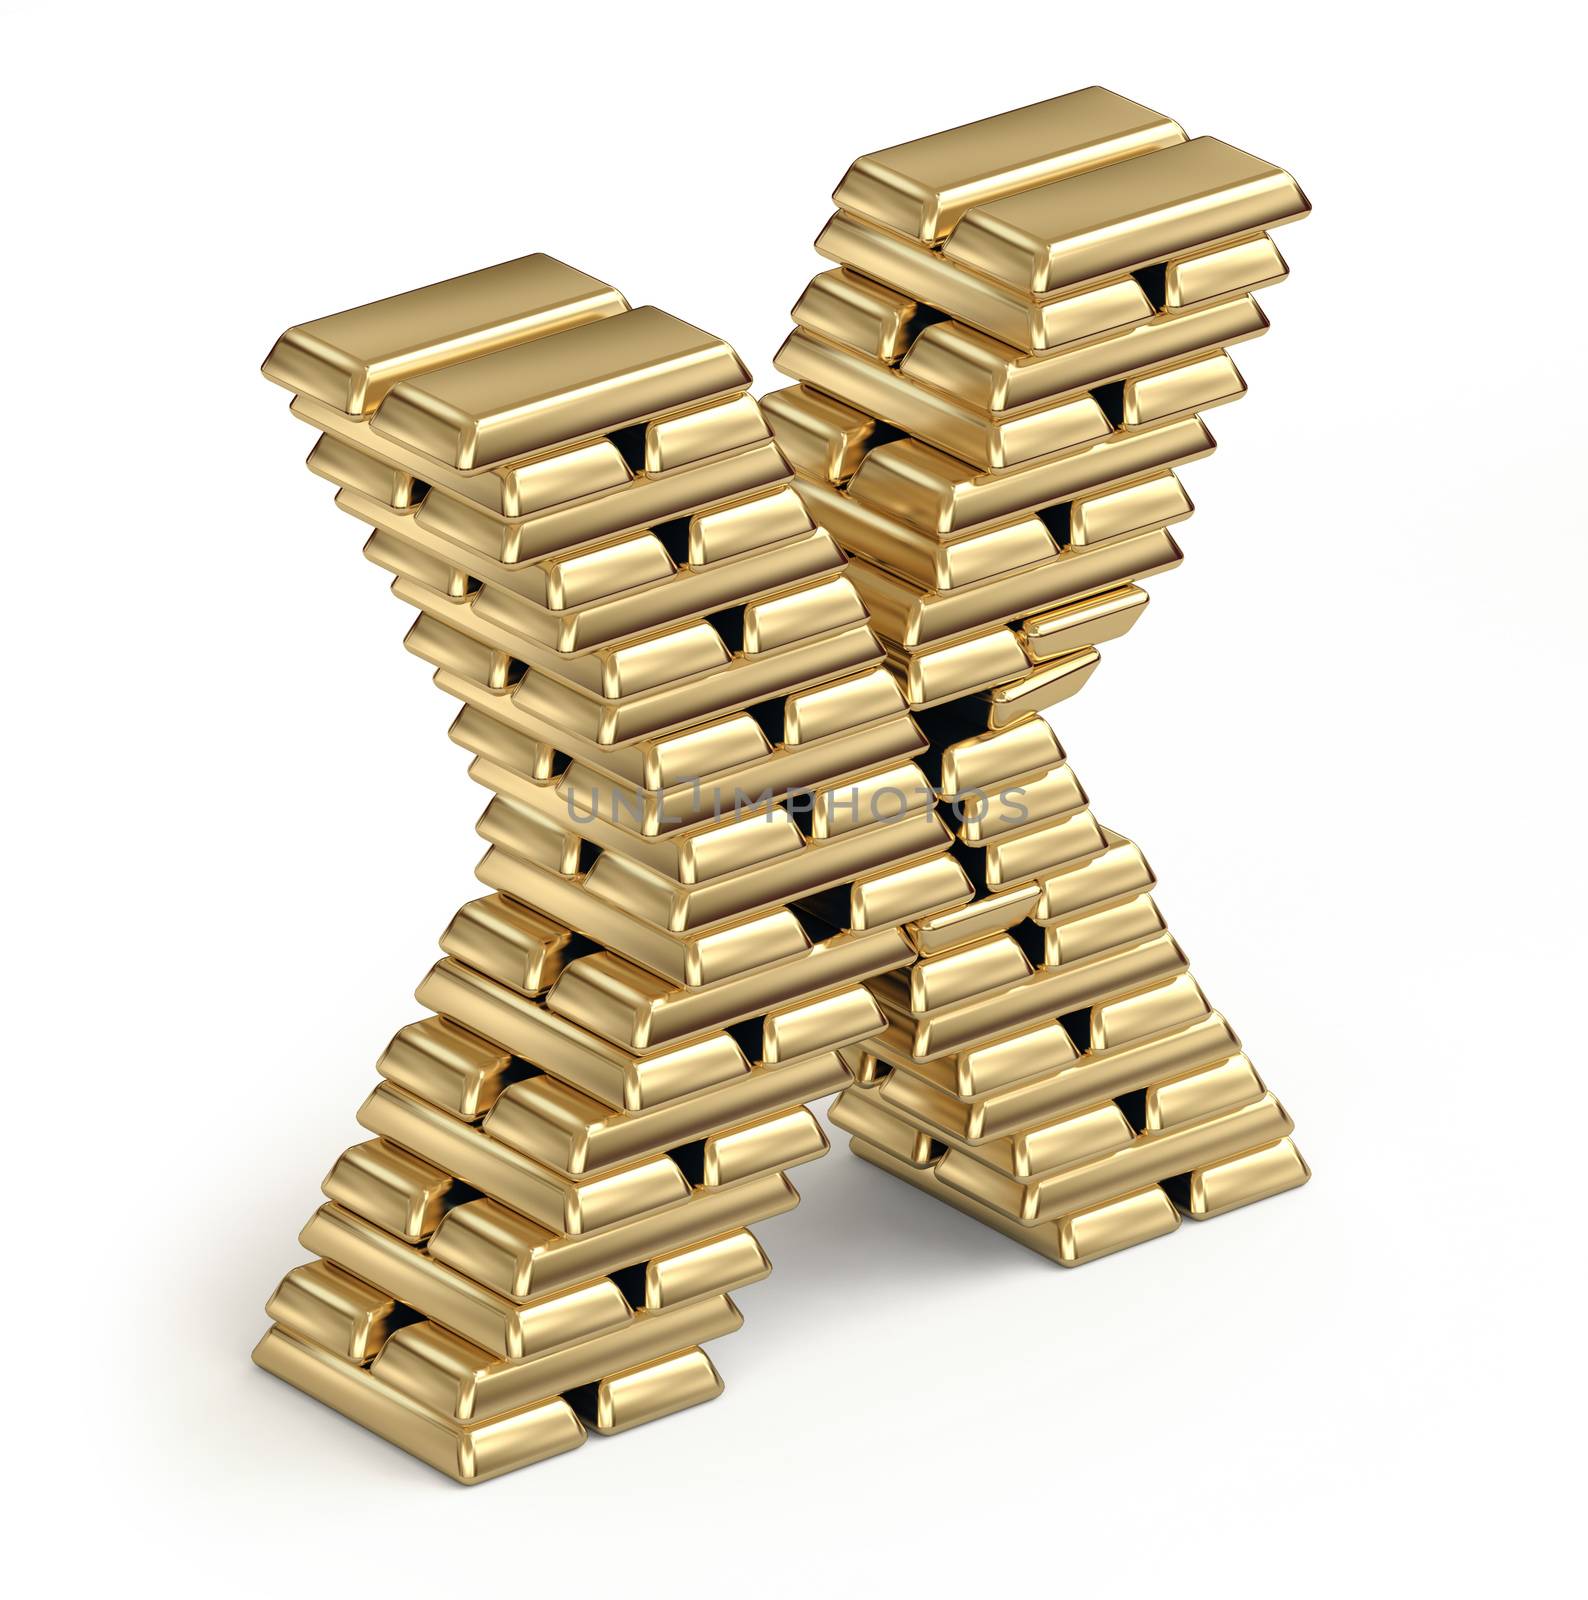 Letter X from stacked gold bars 3d in isometric on white background